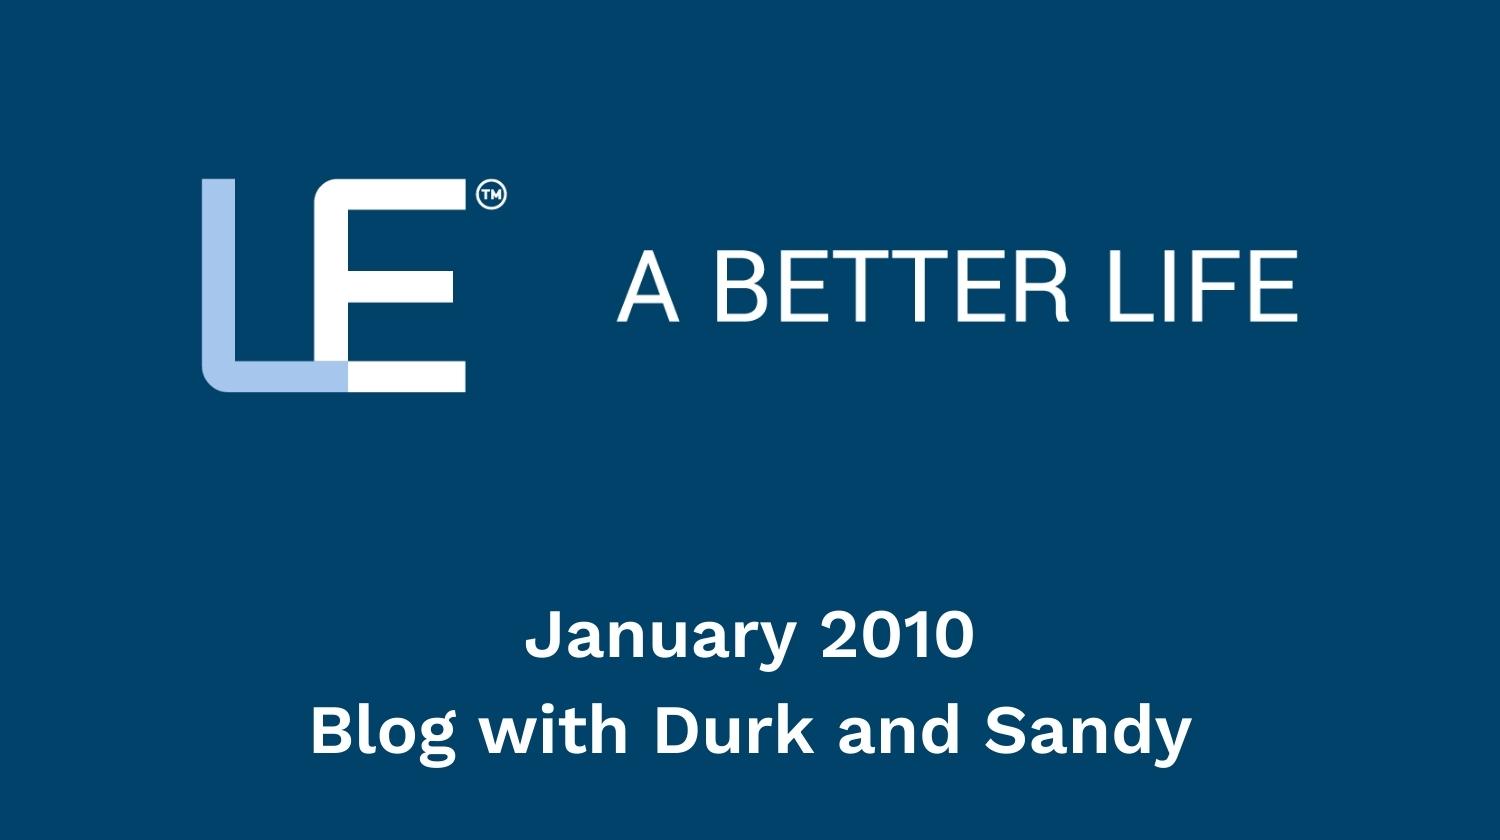 January 2010 Blog with Durk and Sandy